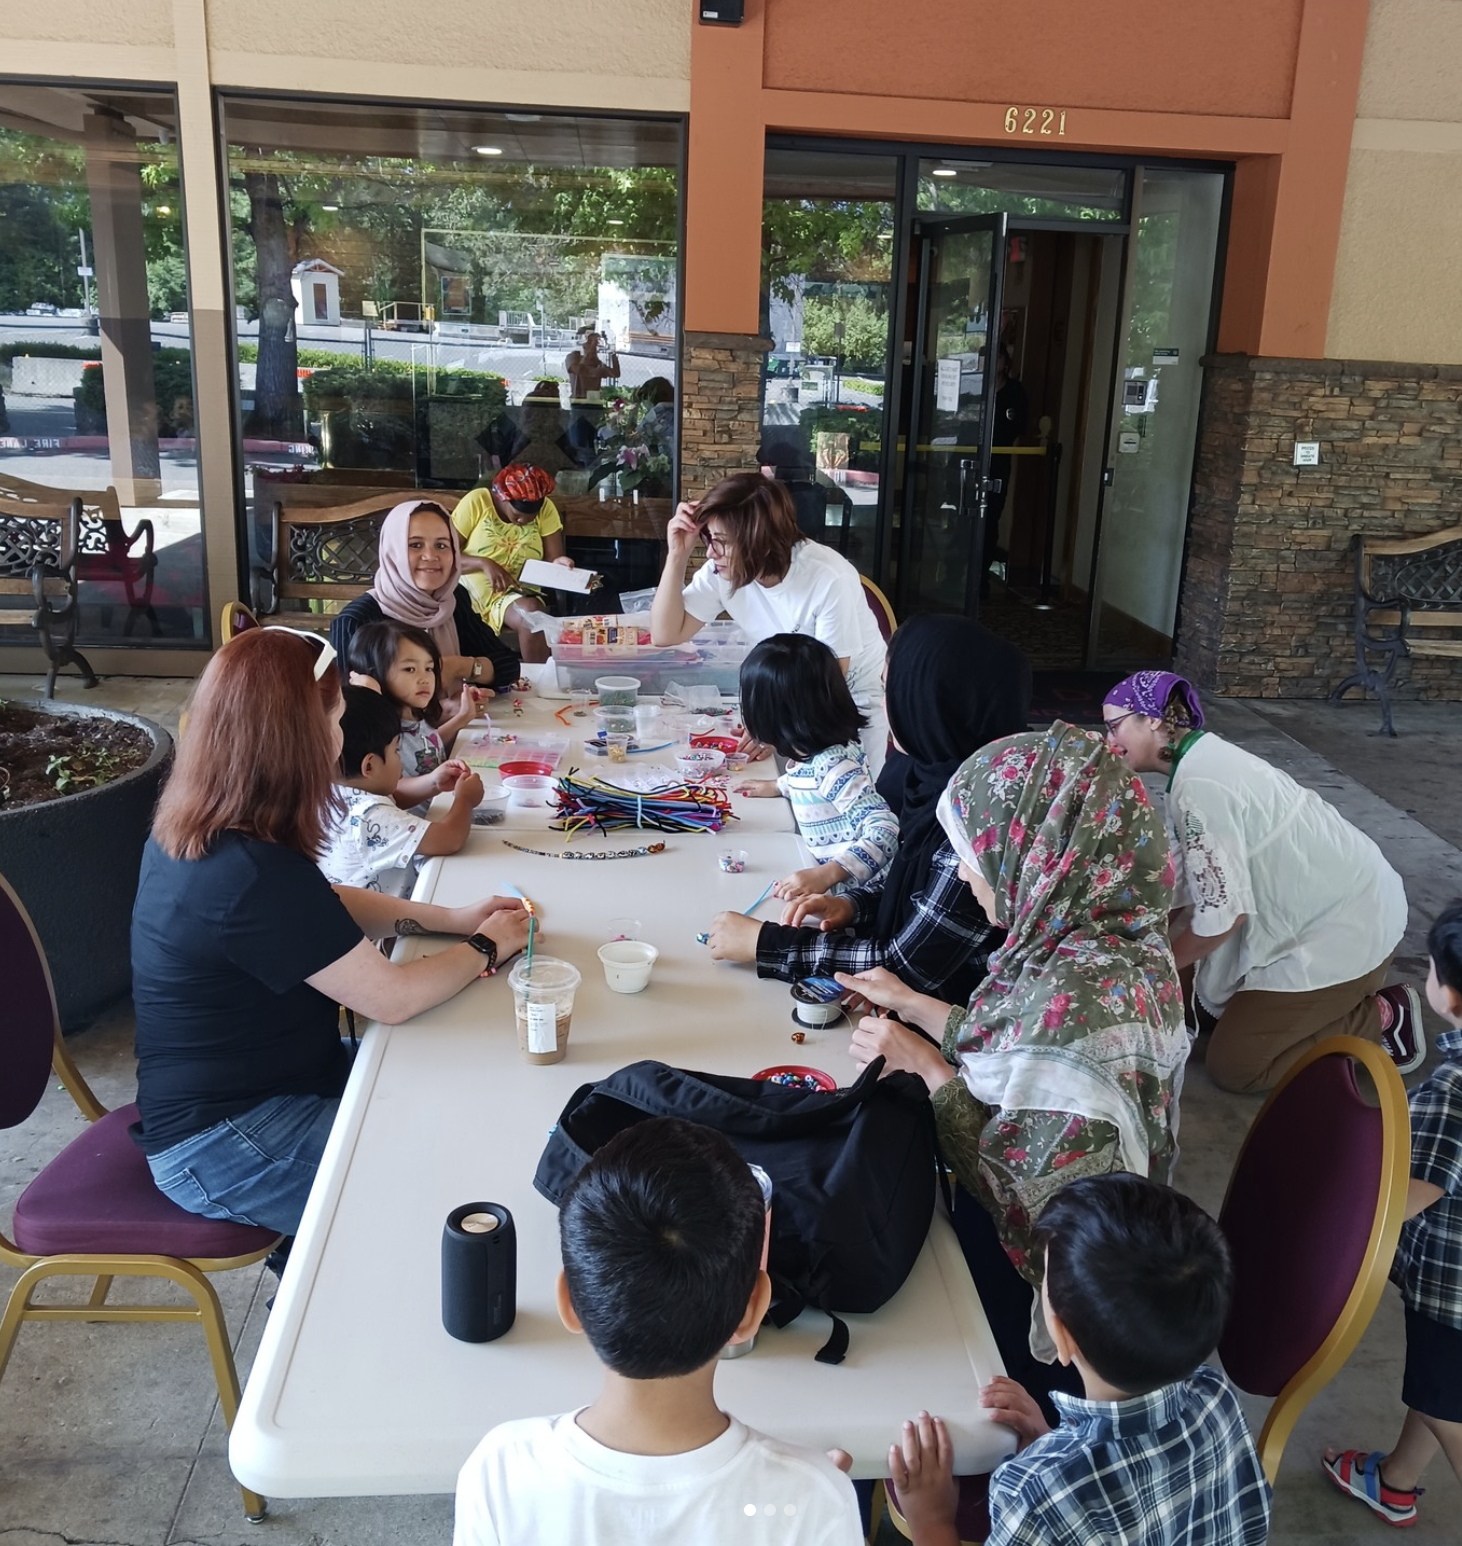  Community Education collaborates with Multnomah Arts Center (MAC) to host recurring arts and crafts workshops in the Welcome Center tailored for children and families. 